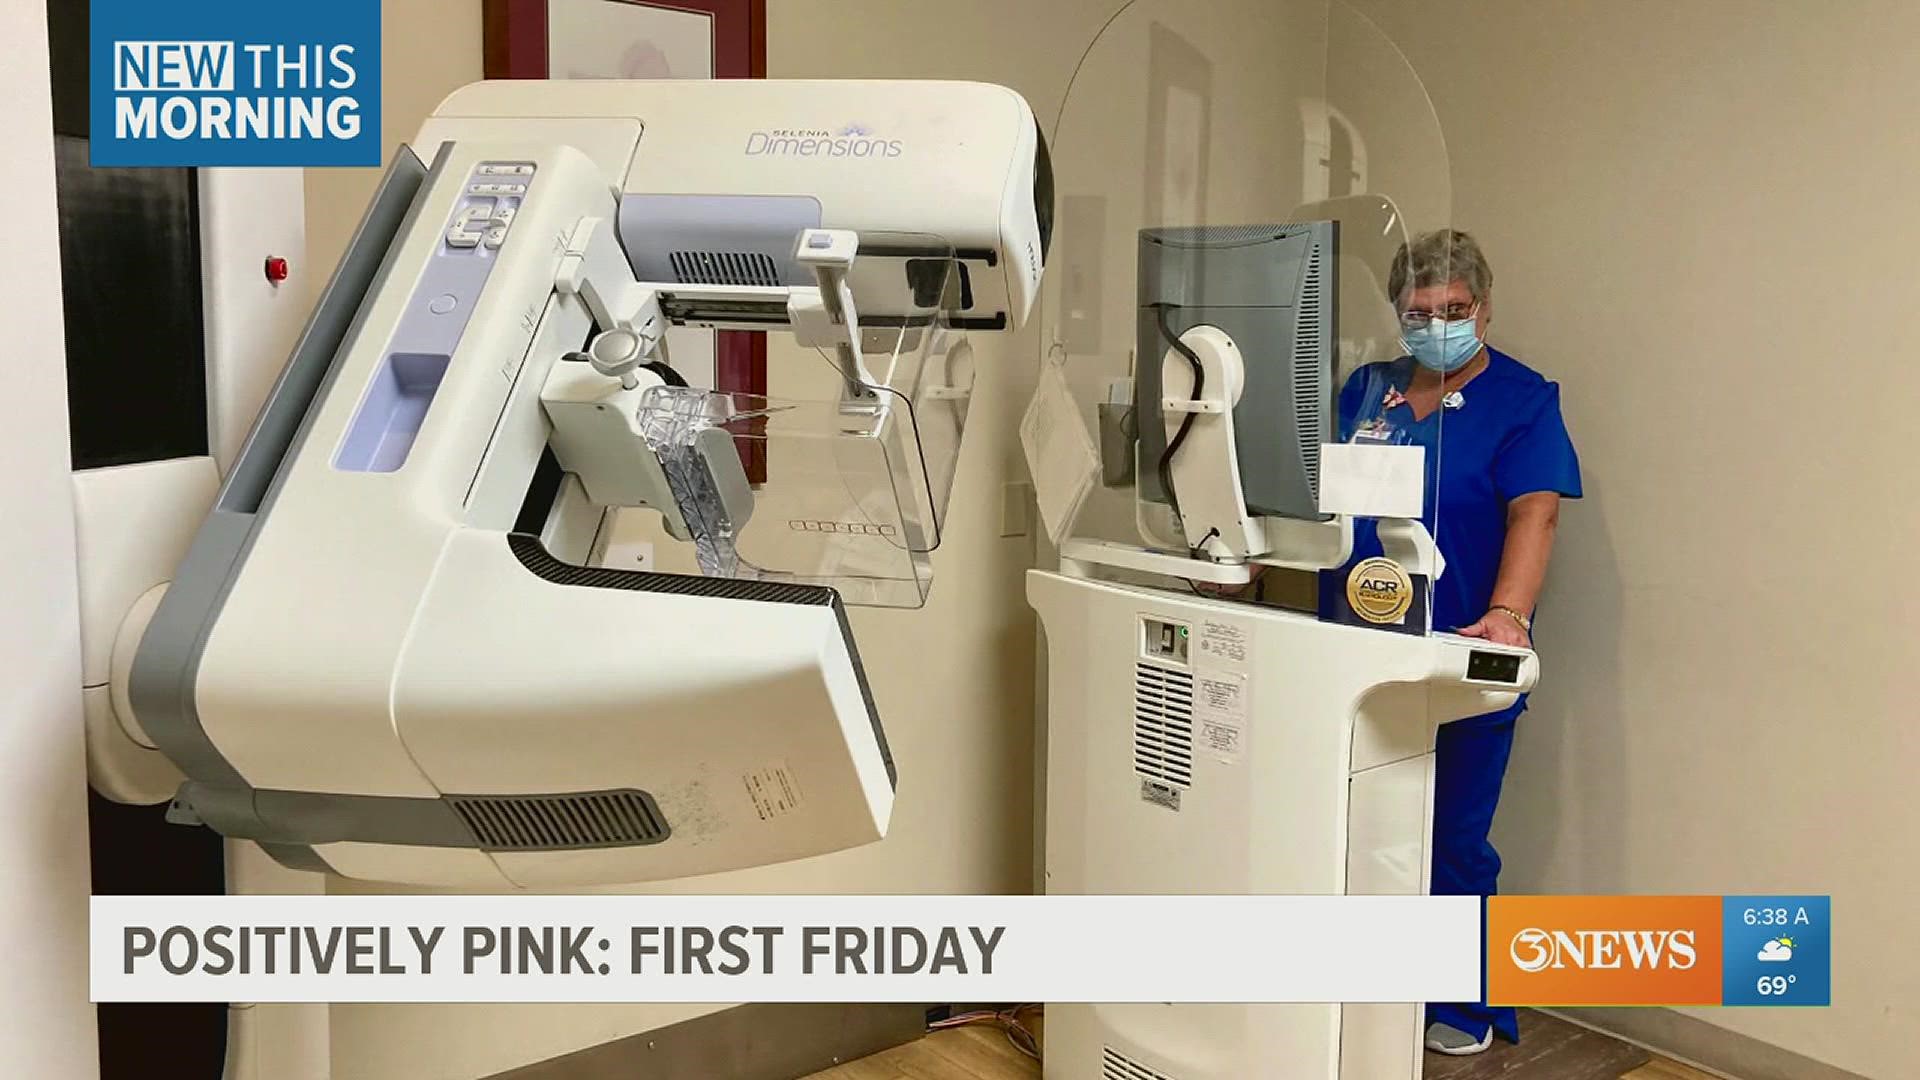 First Friday relies on donations to meet the demand for those with little to no insurance have mammograms. Call 361-985-5600 to find out how.